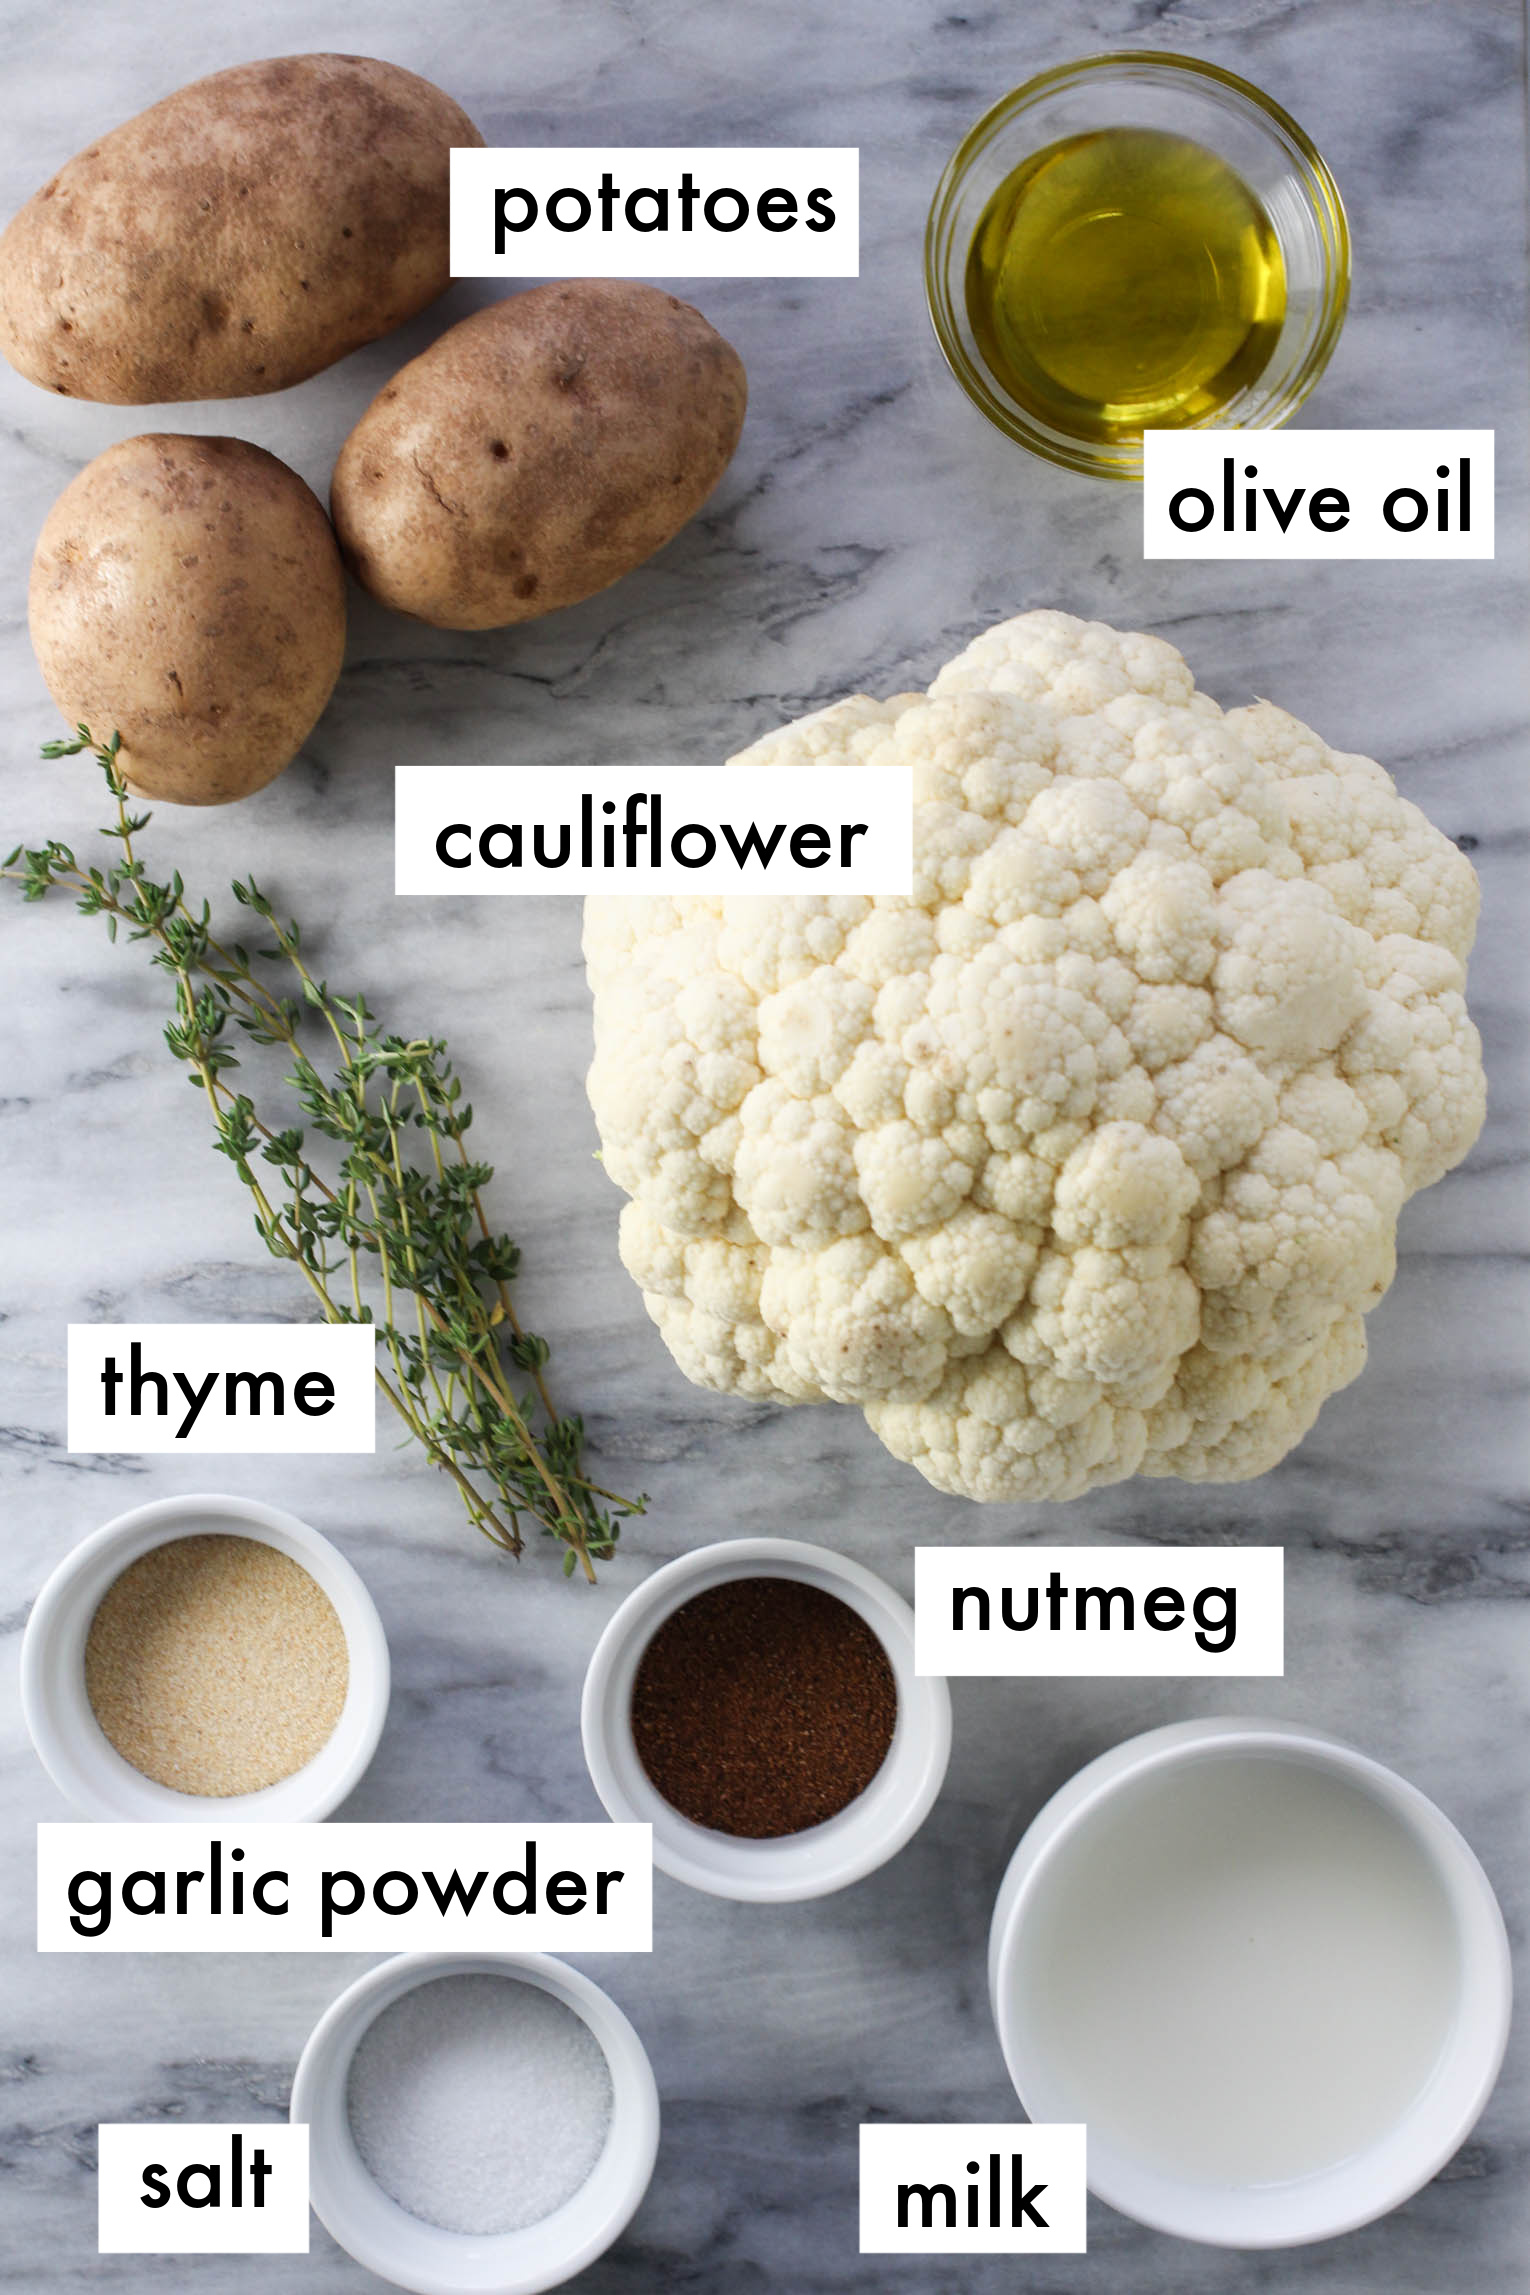 Ingredients for potato and cauliflower mash displayed on marble background. The ingredients are labeled as follows: potatoes, olive oil, cauliflower, thyme, nutmeg, garlic powder, salt, milk.